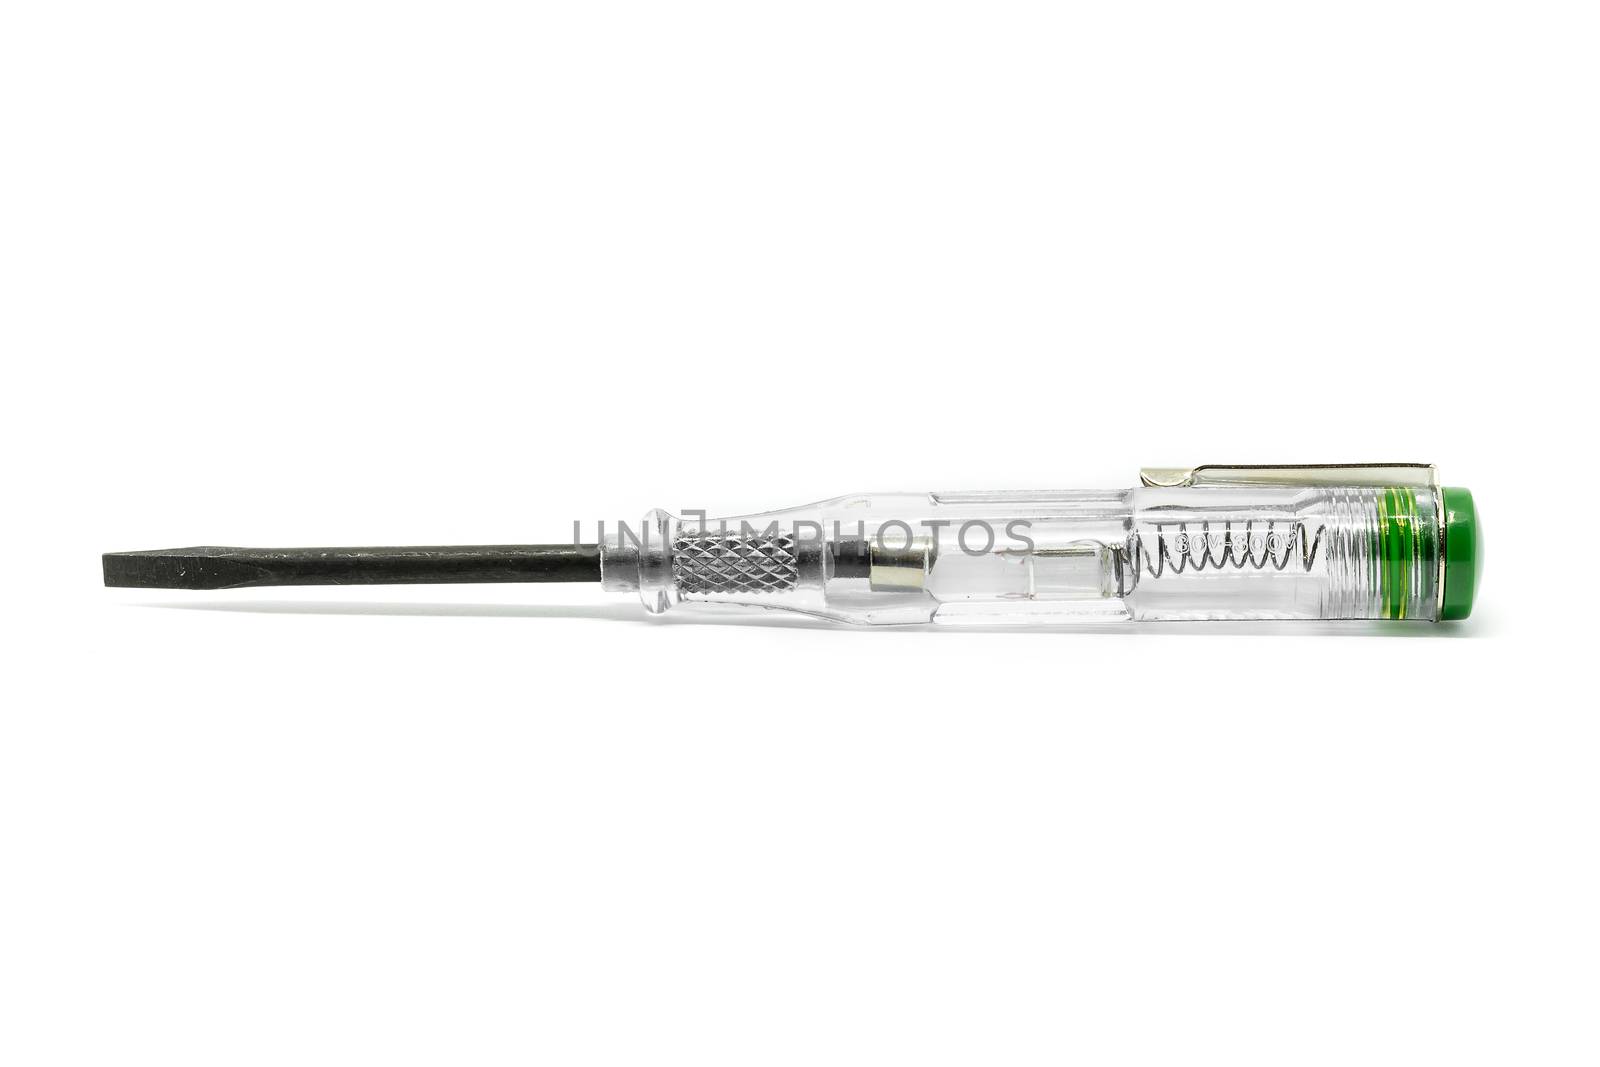 Electrical tester screwdriver on white background. by nikonlike